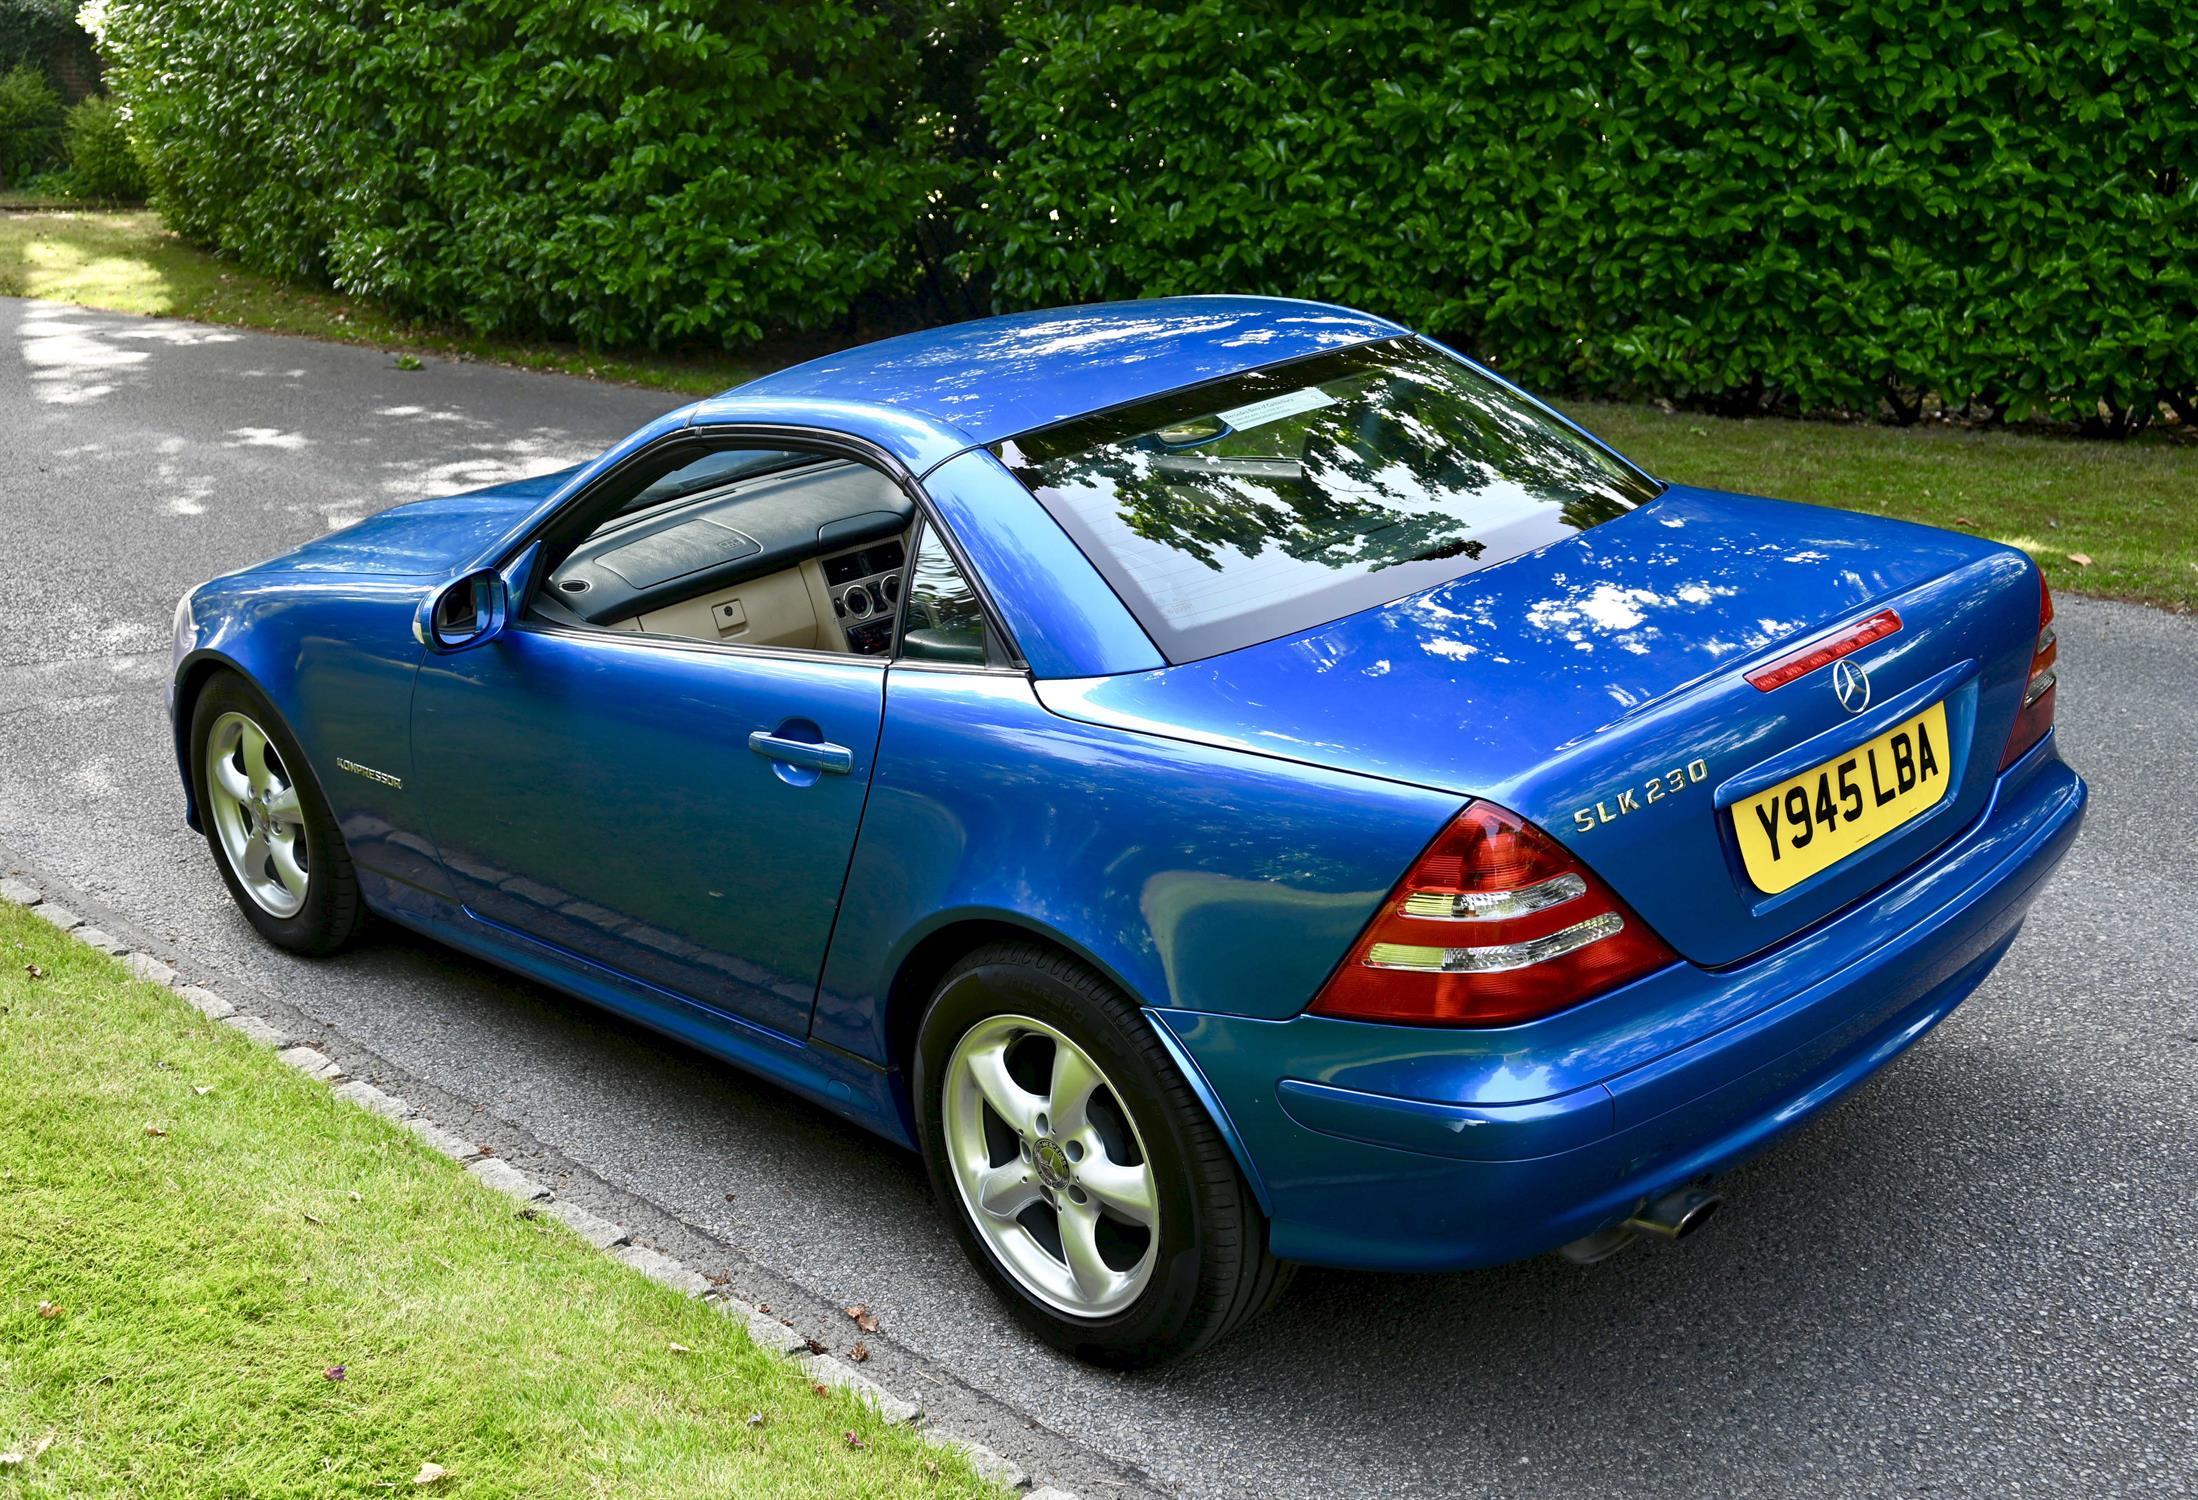 Mercedes Benz 230 SLK Convertible Auto Electric Blue coachwork with duo-tone black/beige leather - Image 6 of 15